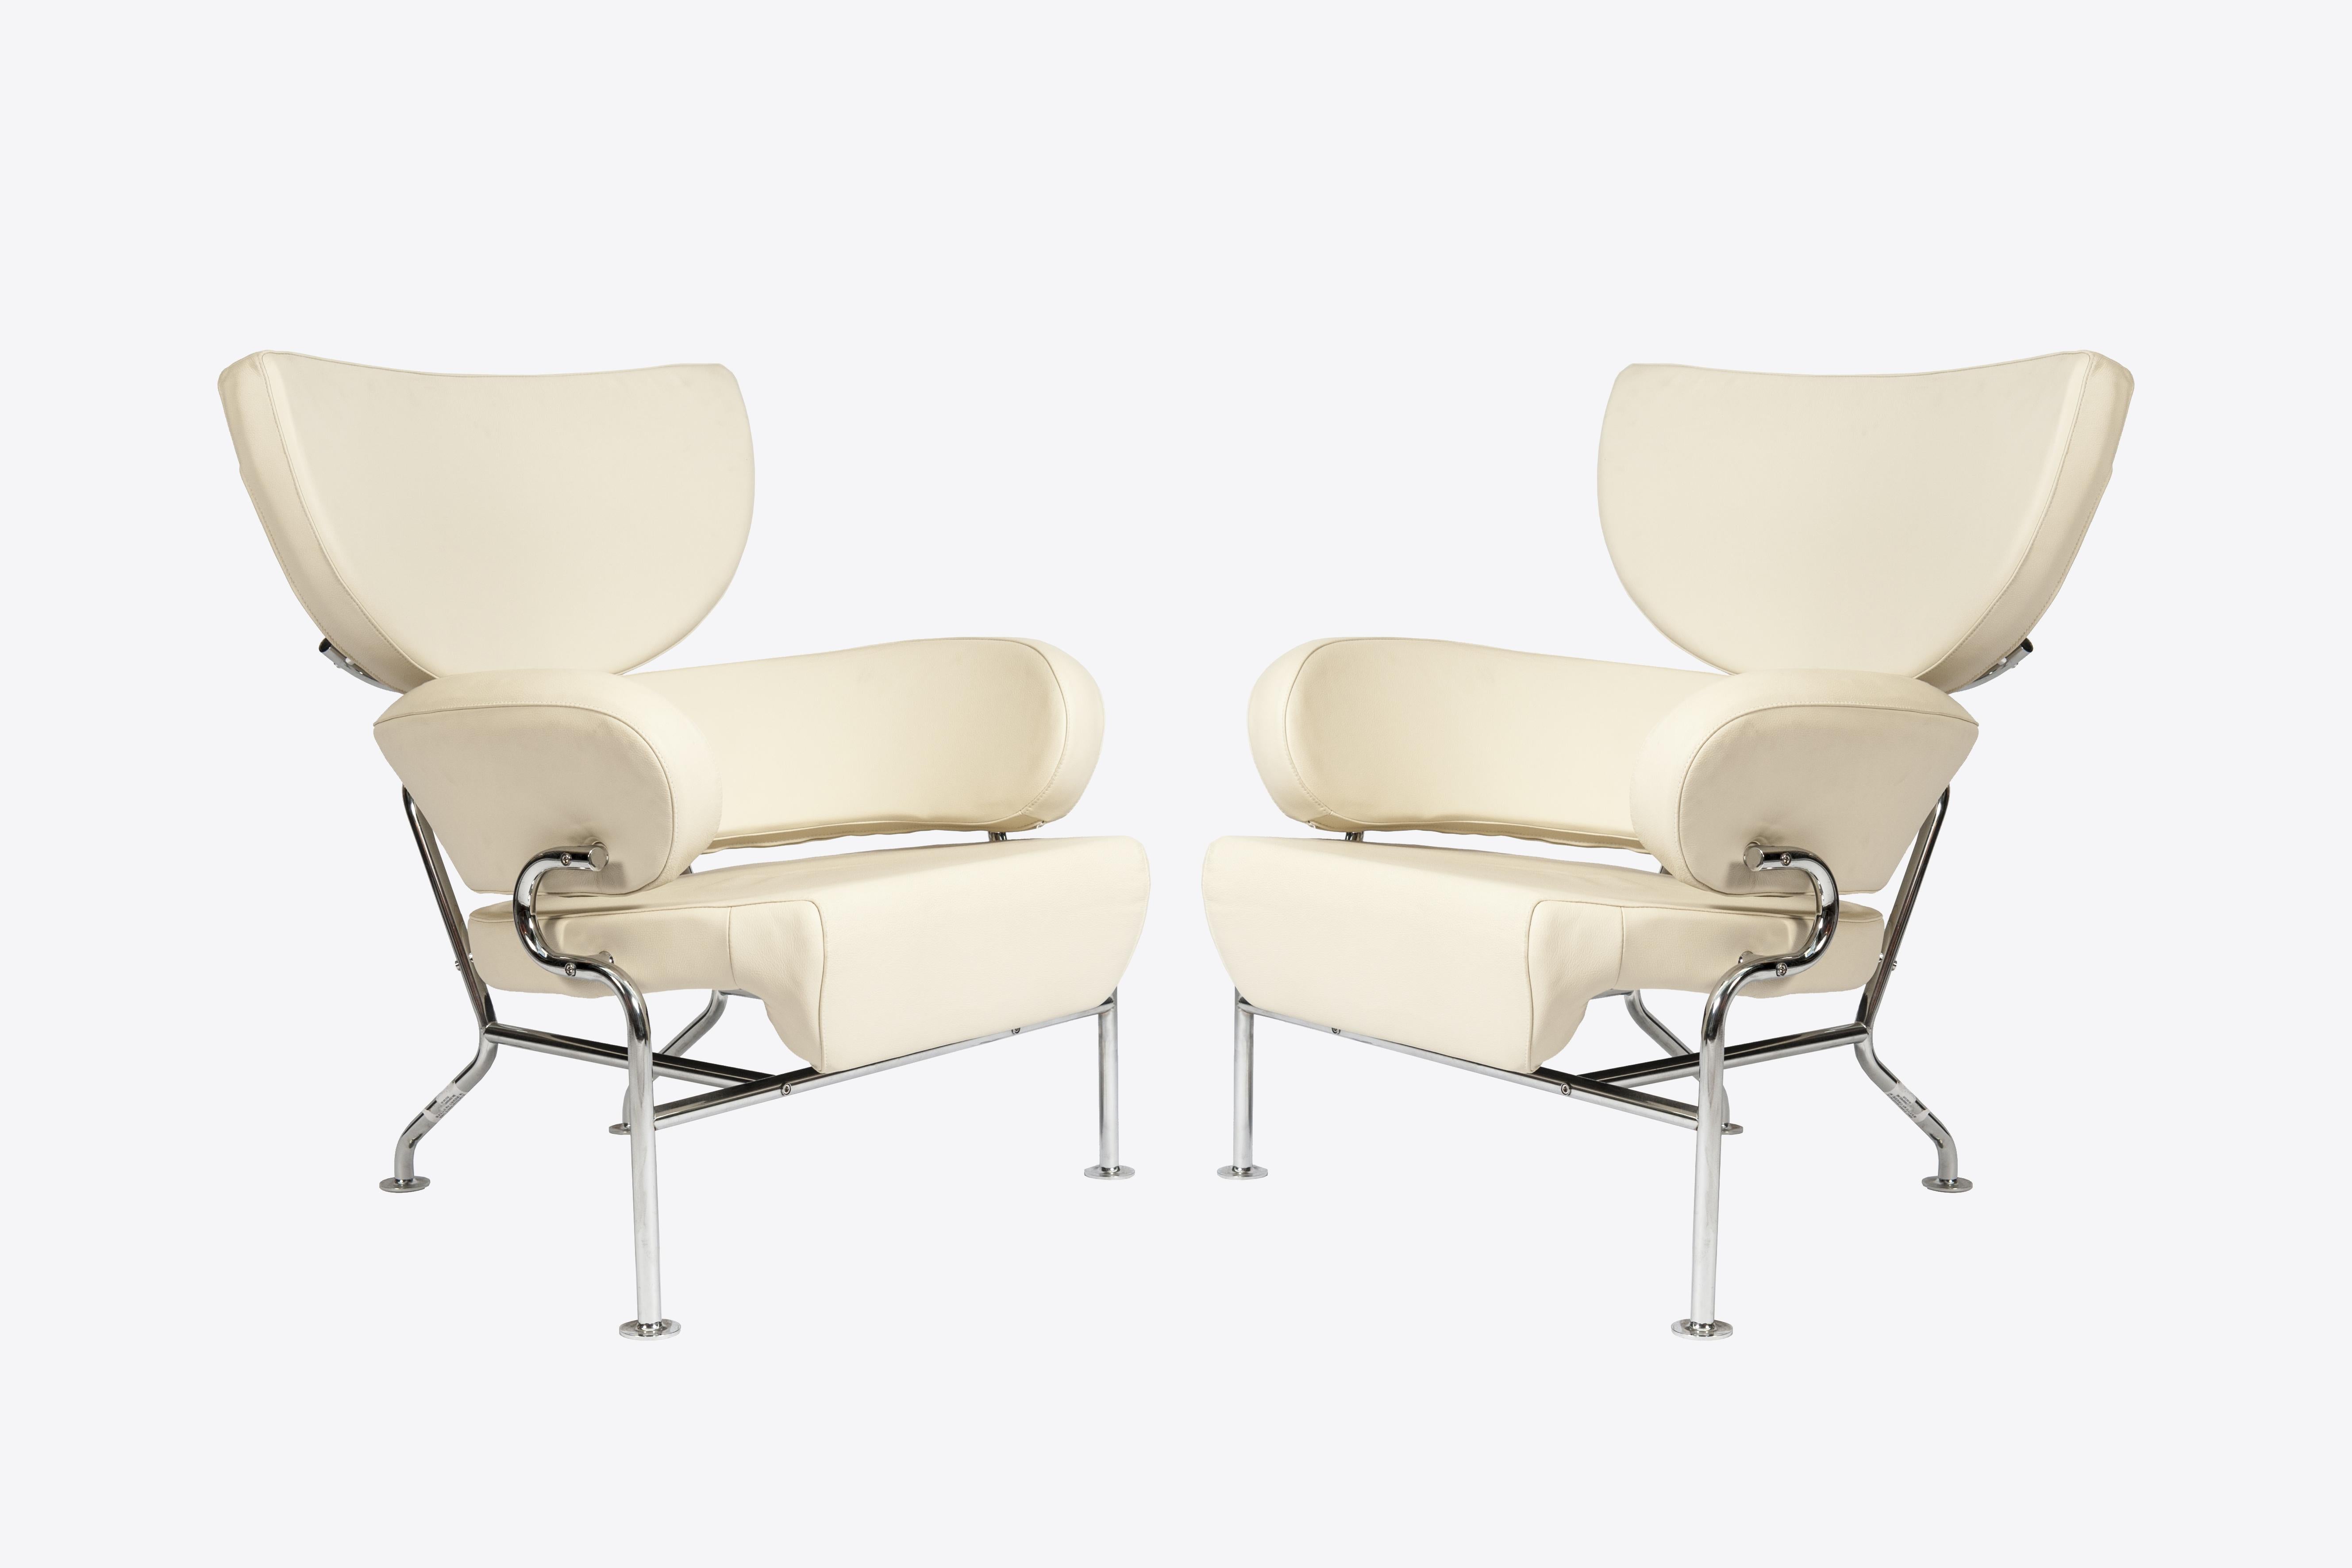 Pair of Modernist armchairs 
Upholstery with leather.